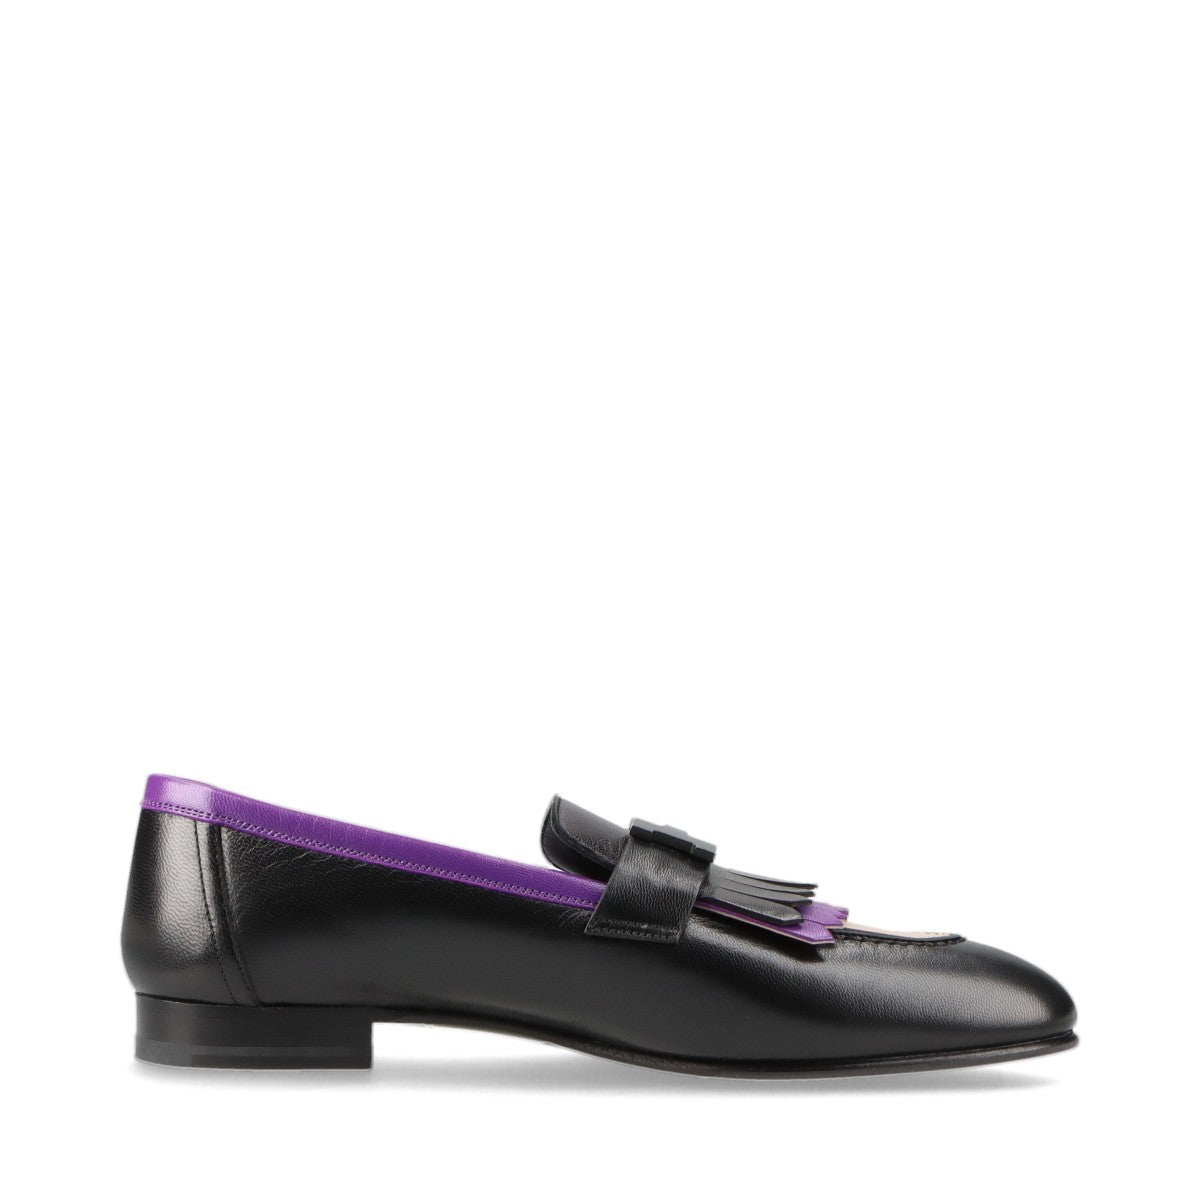 Hermès Royal Leather Loafer EU37 1/2 Ladies' Black x purple Constance Fringe box There is a bag